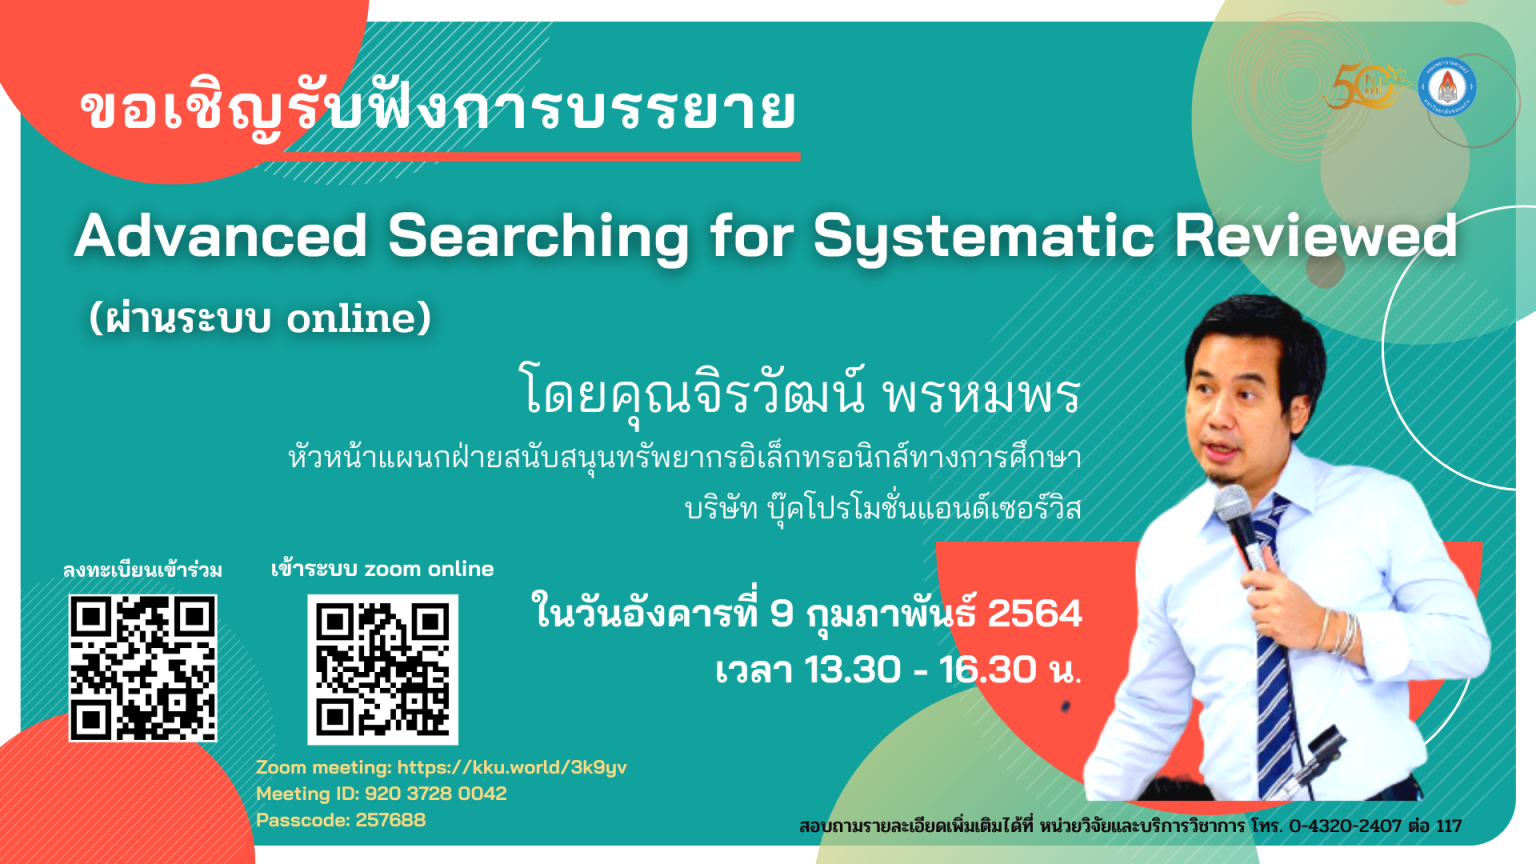 Advanced Searching for Systematics Reviews